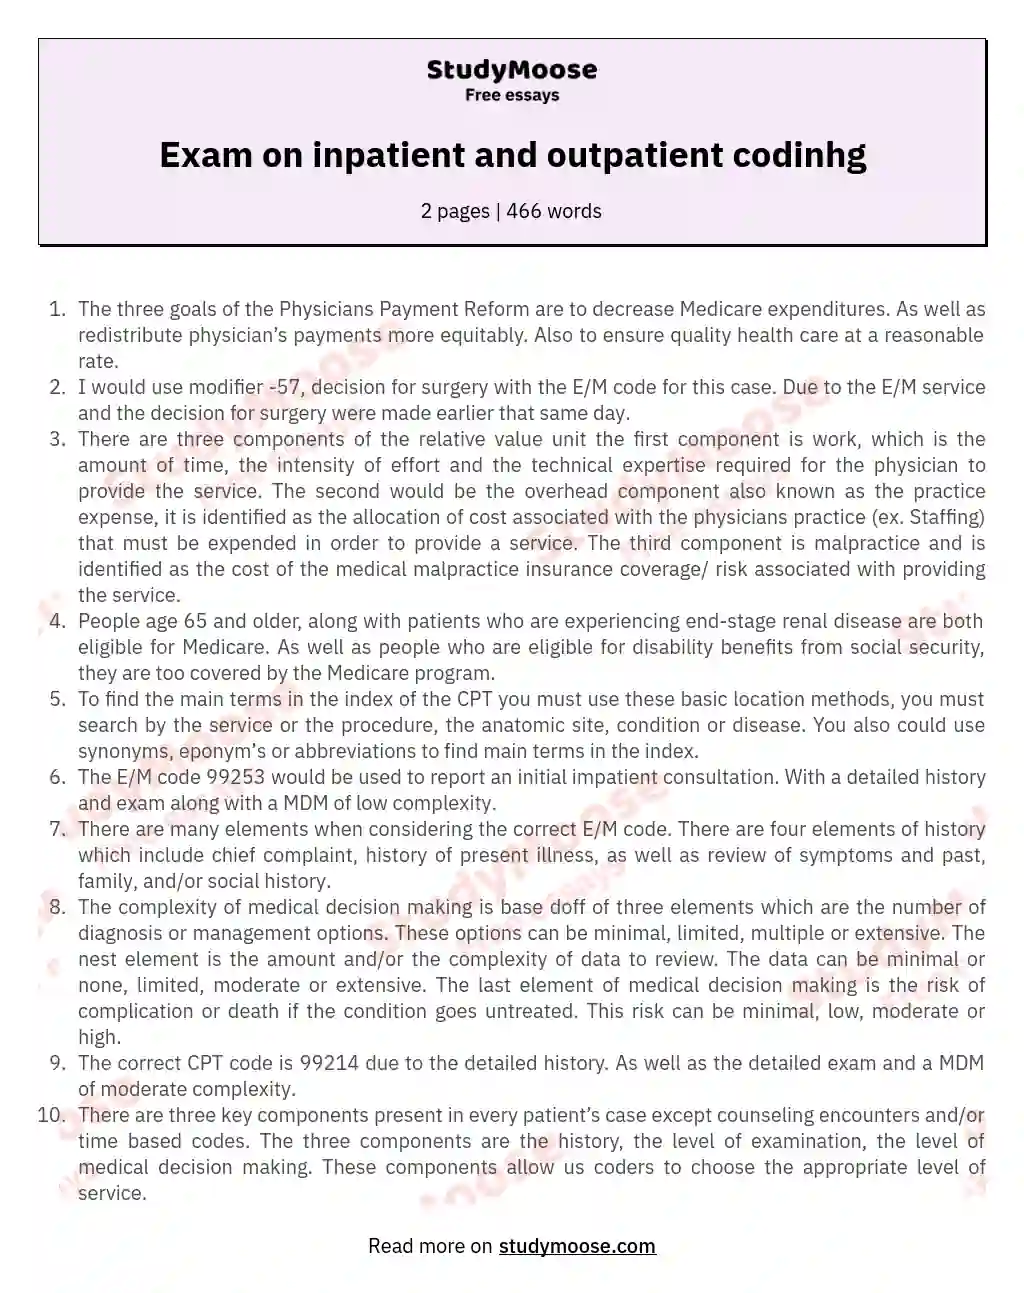 Exam on inpatient and outpatient codinhg essay